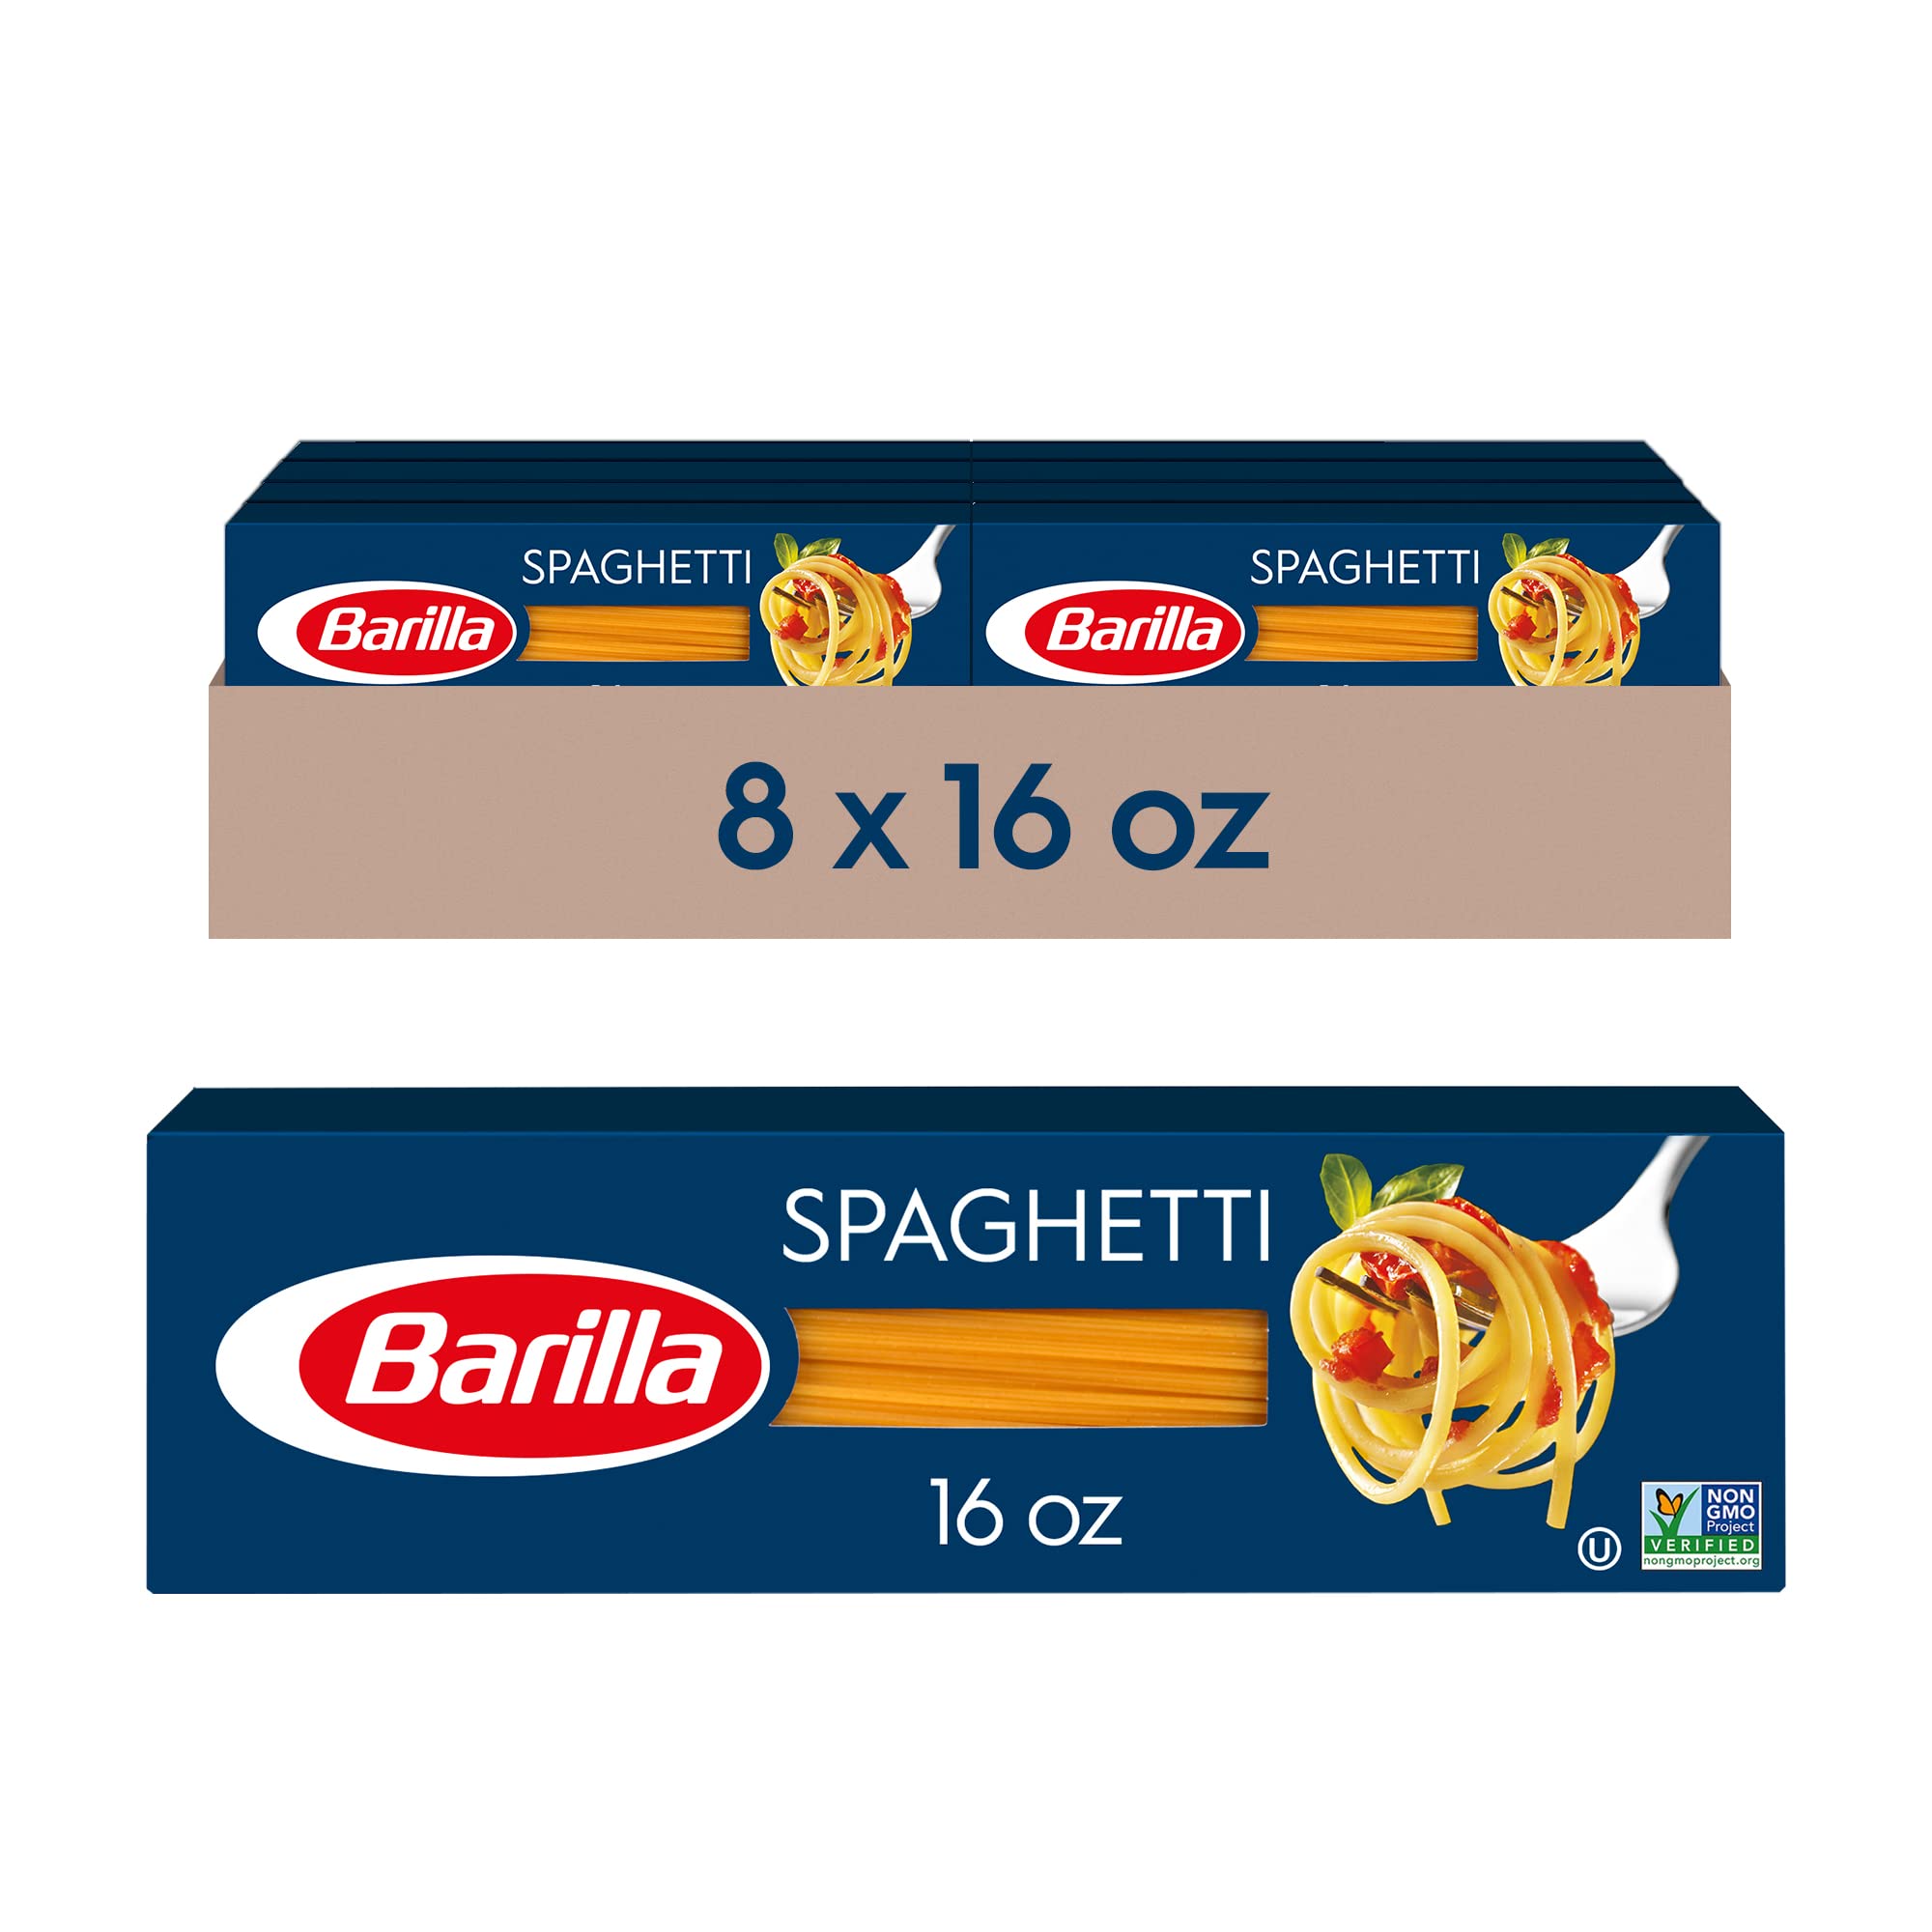 Barilla Offers Month of Pasta in a Box